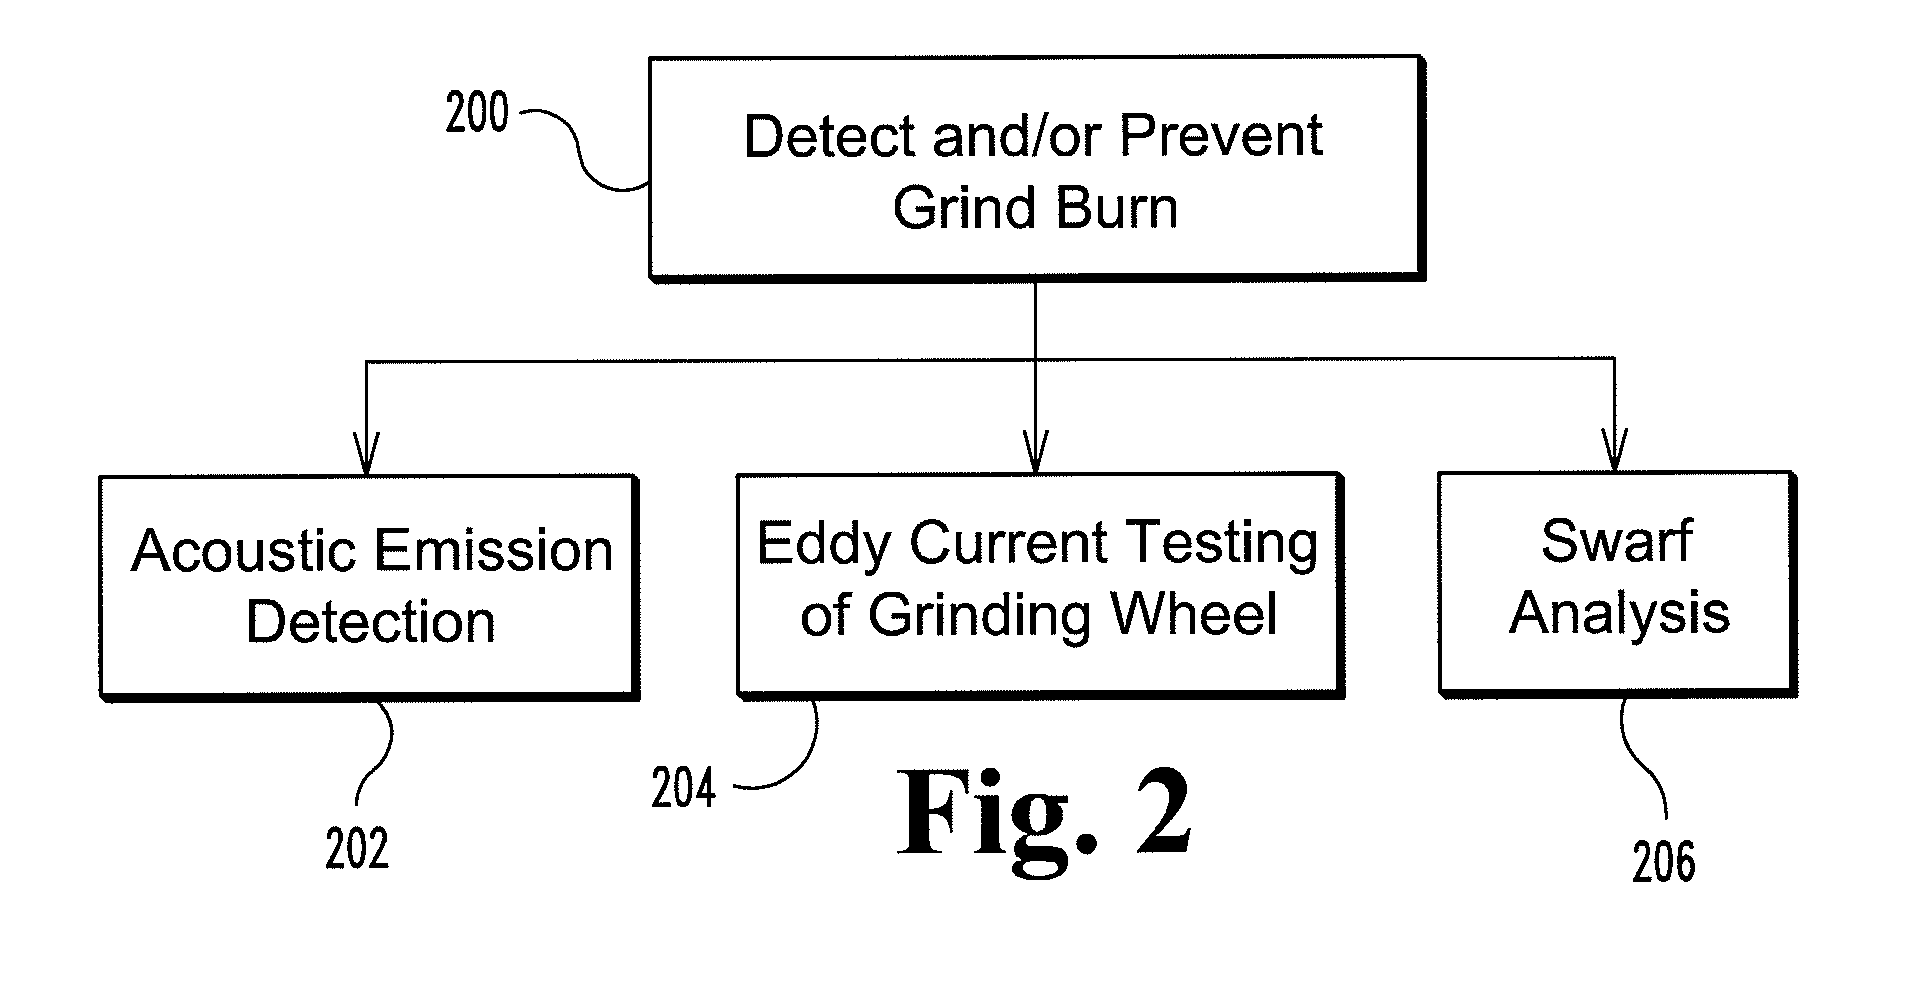 Method for detecting and/or preventing grind burn